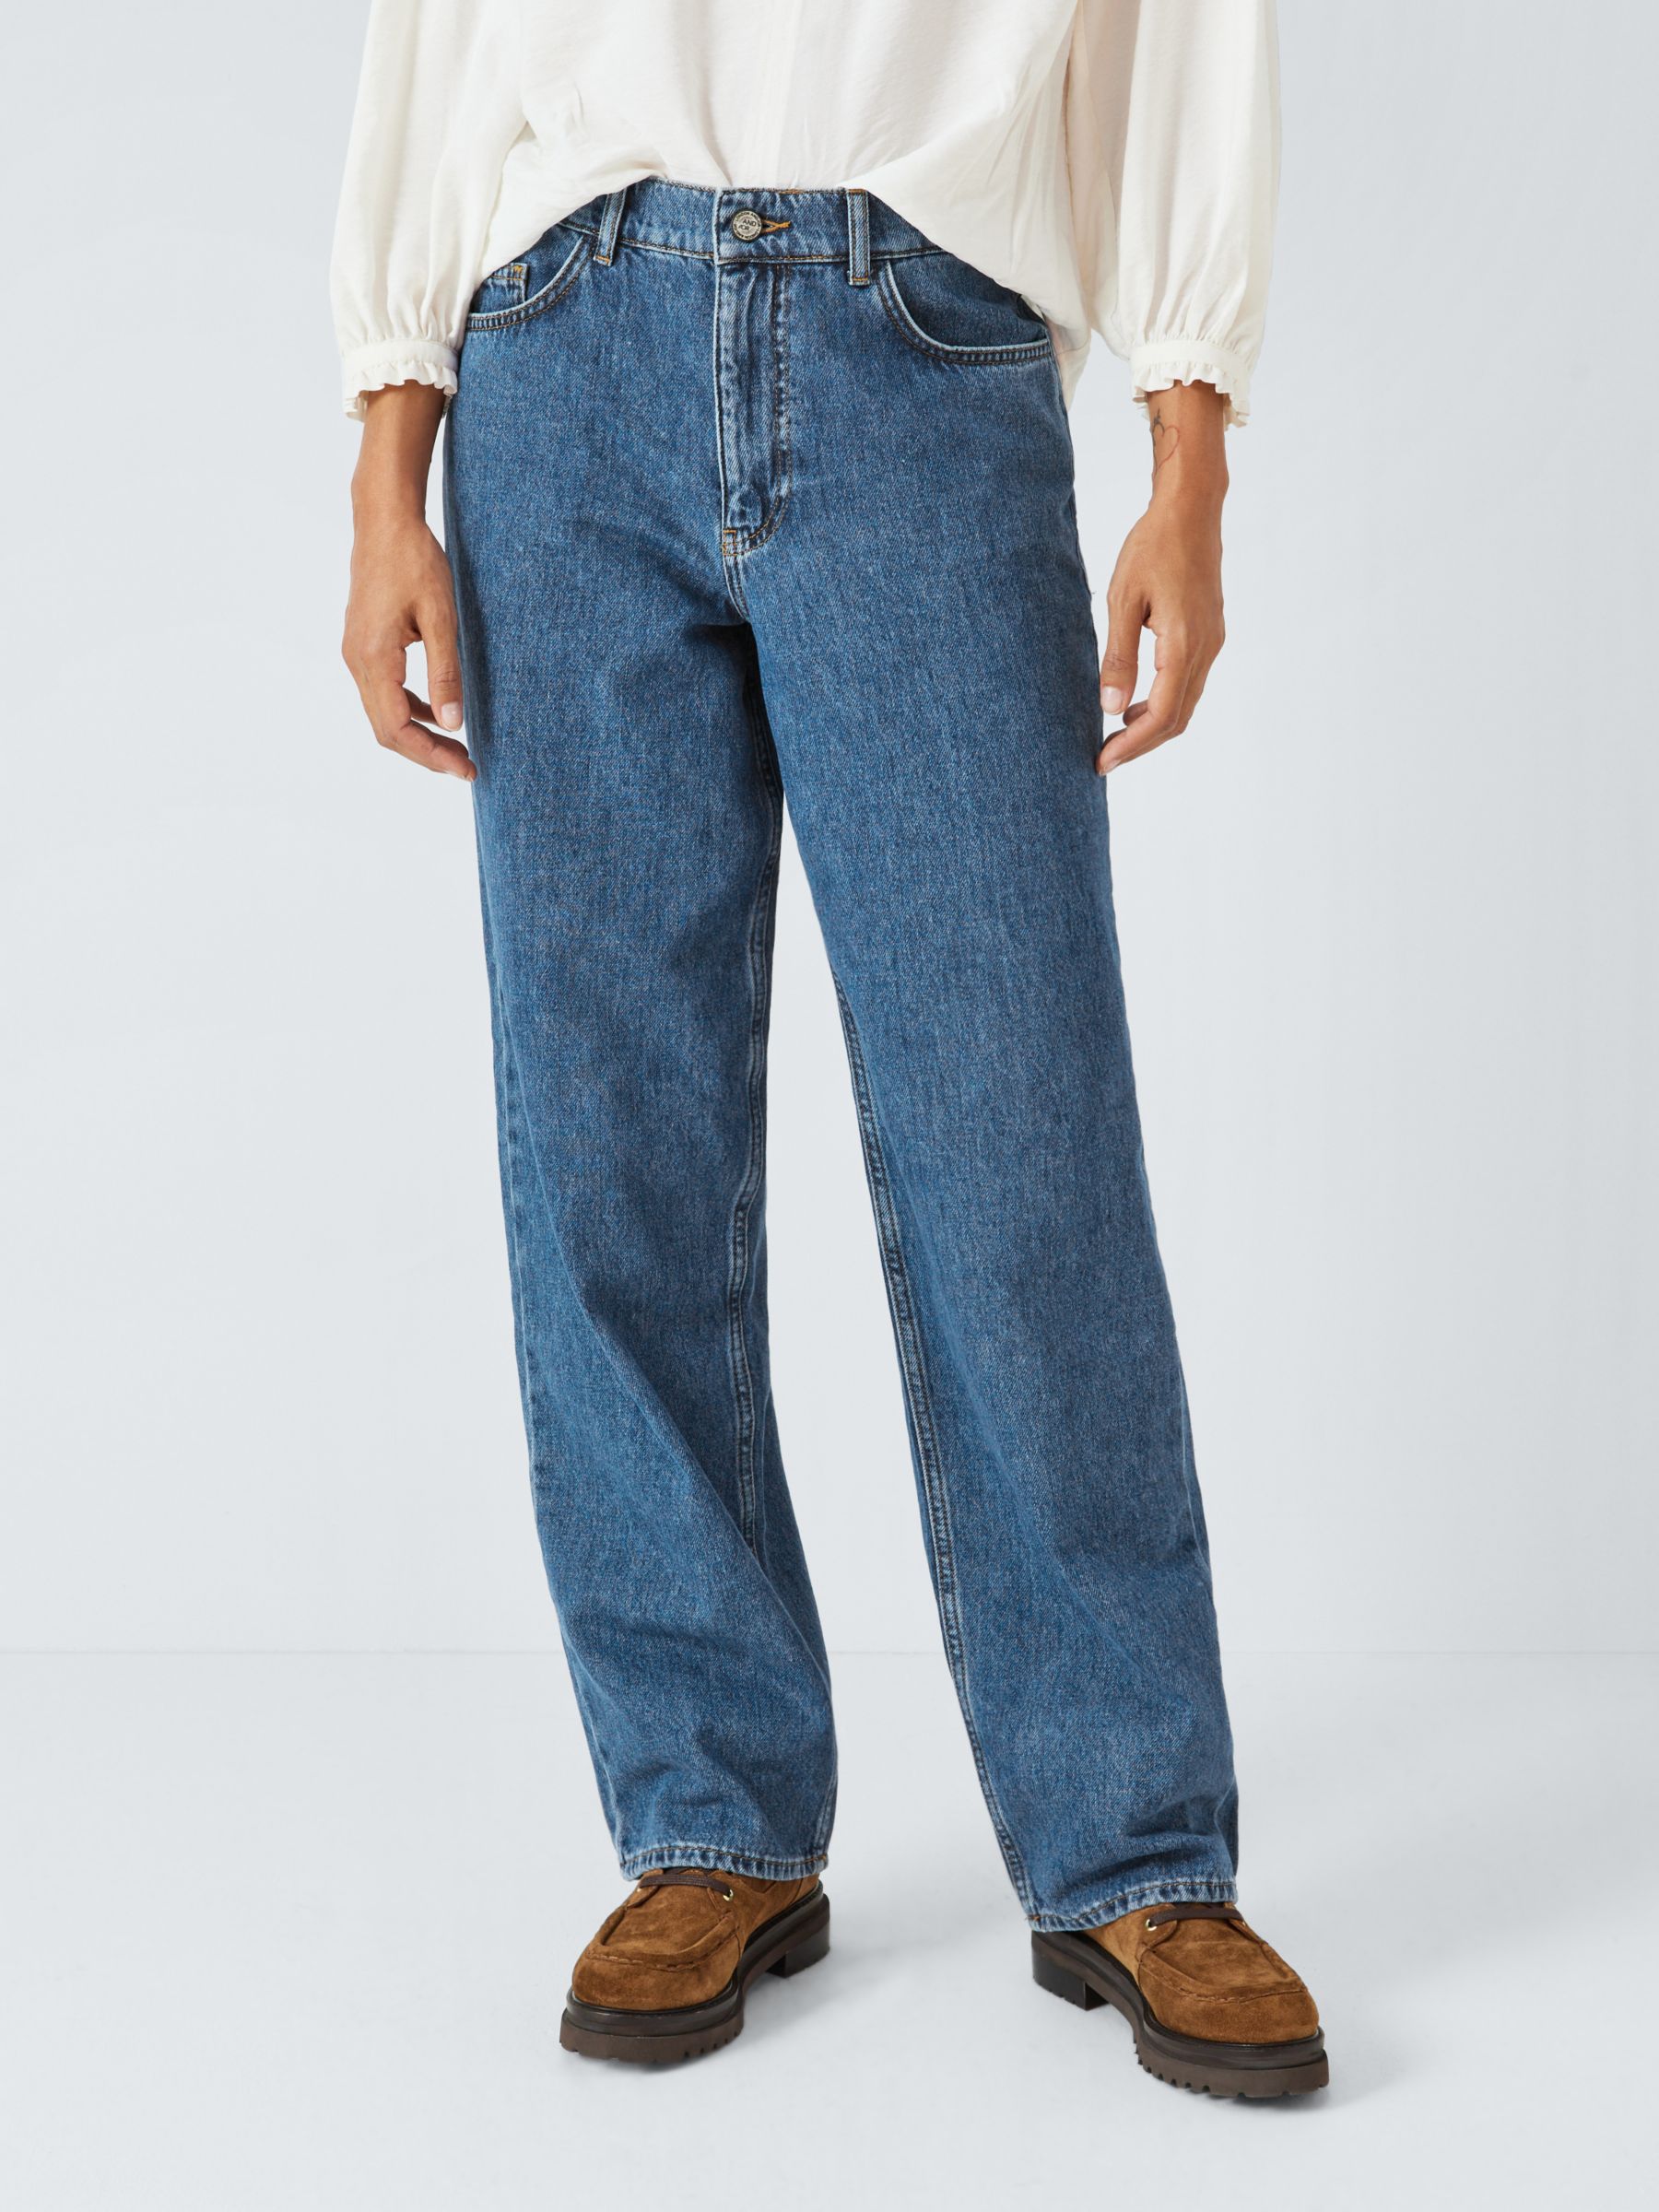 AND/OR Long Beach Baggy Jeans, Mid Blue Wash, 32R